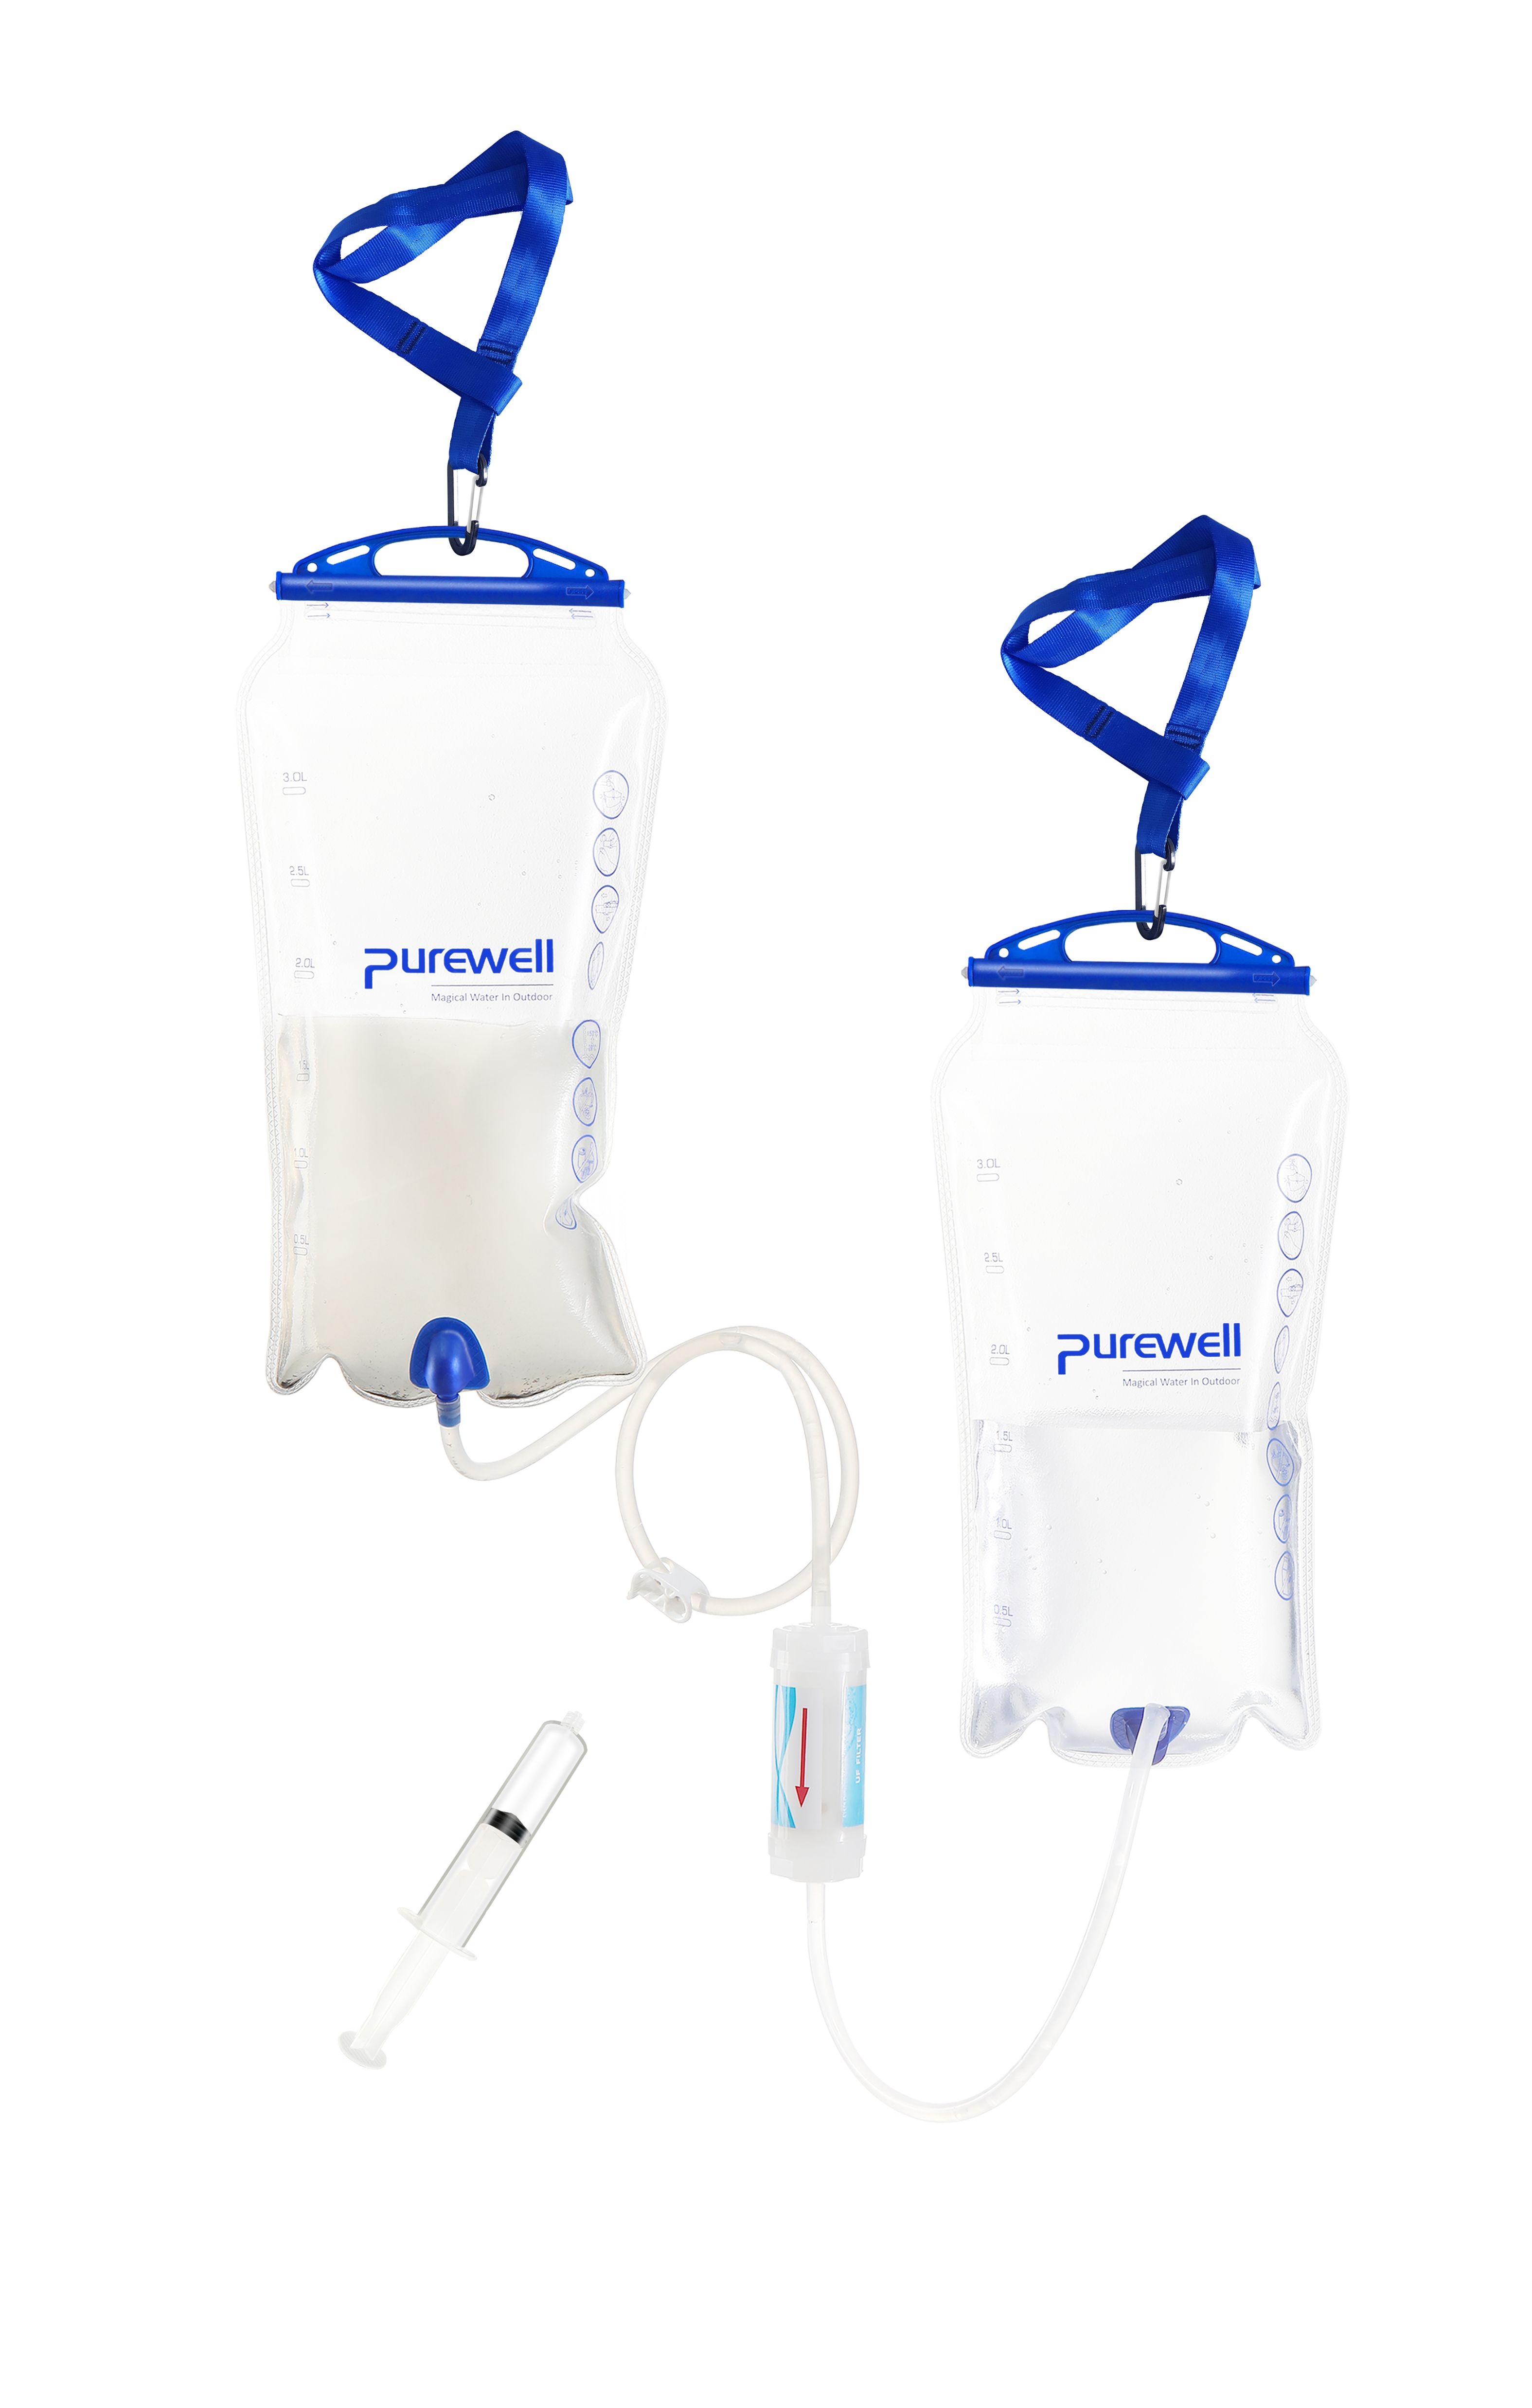 Purewell Array image5